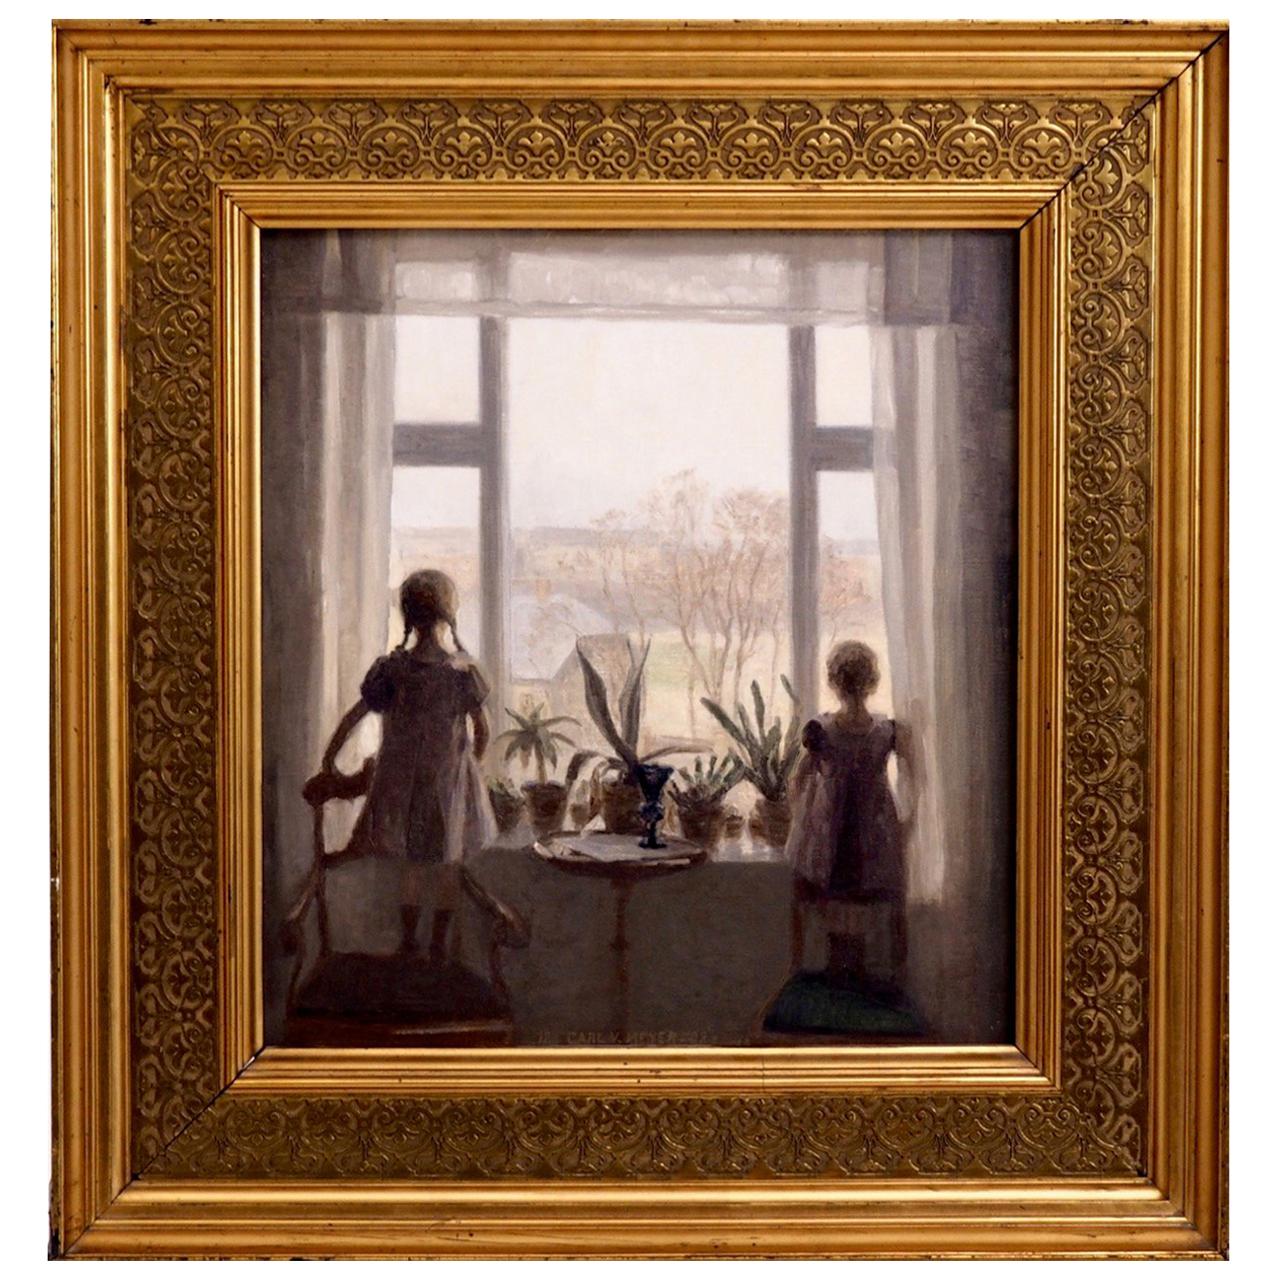 Charming Interior Painting of Two Children, Signed "Carl V. Meyer '08"